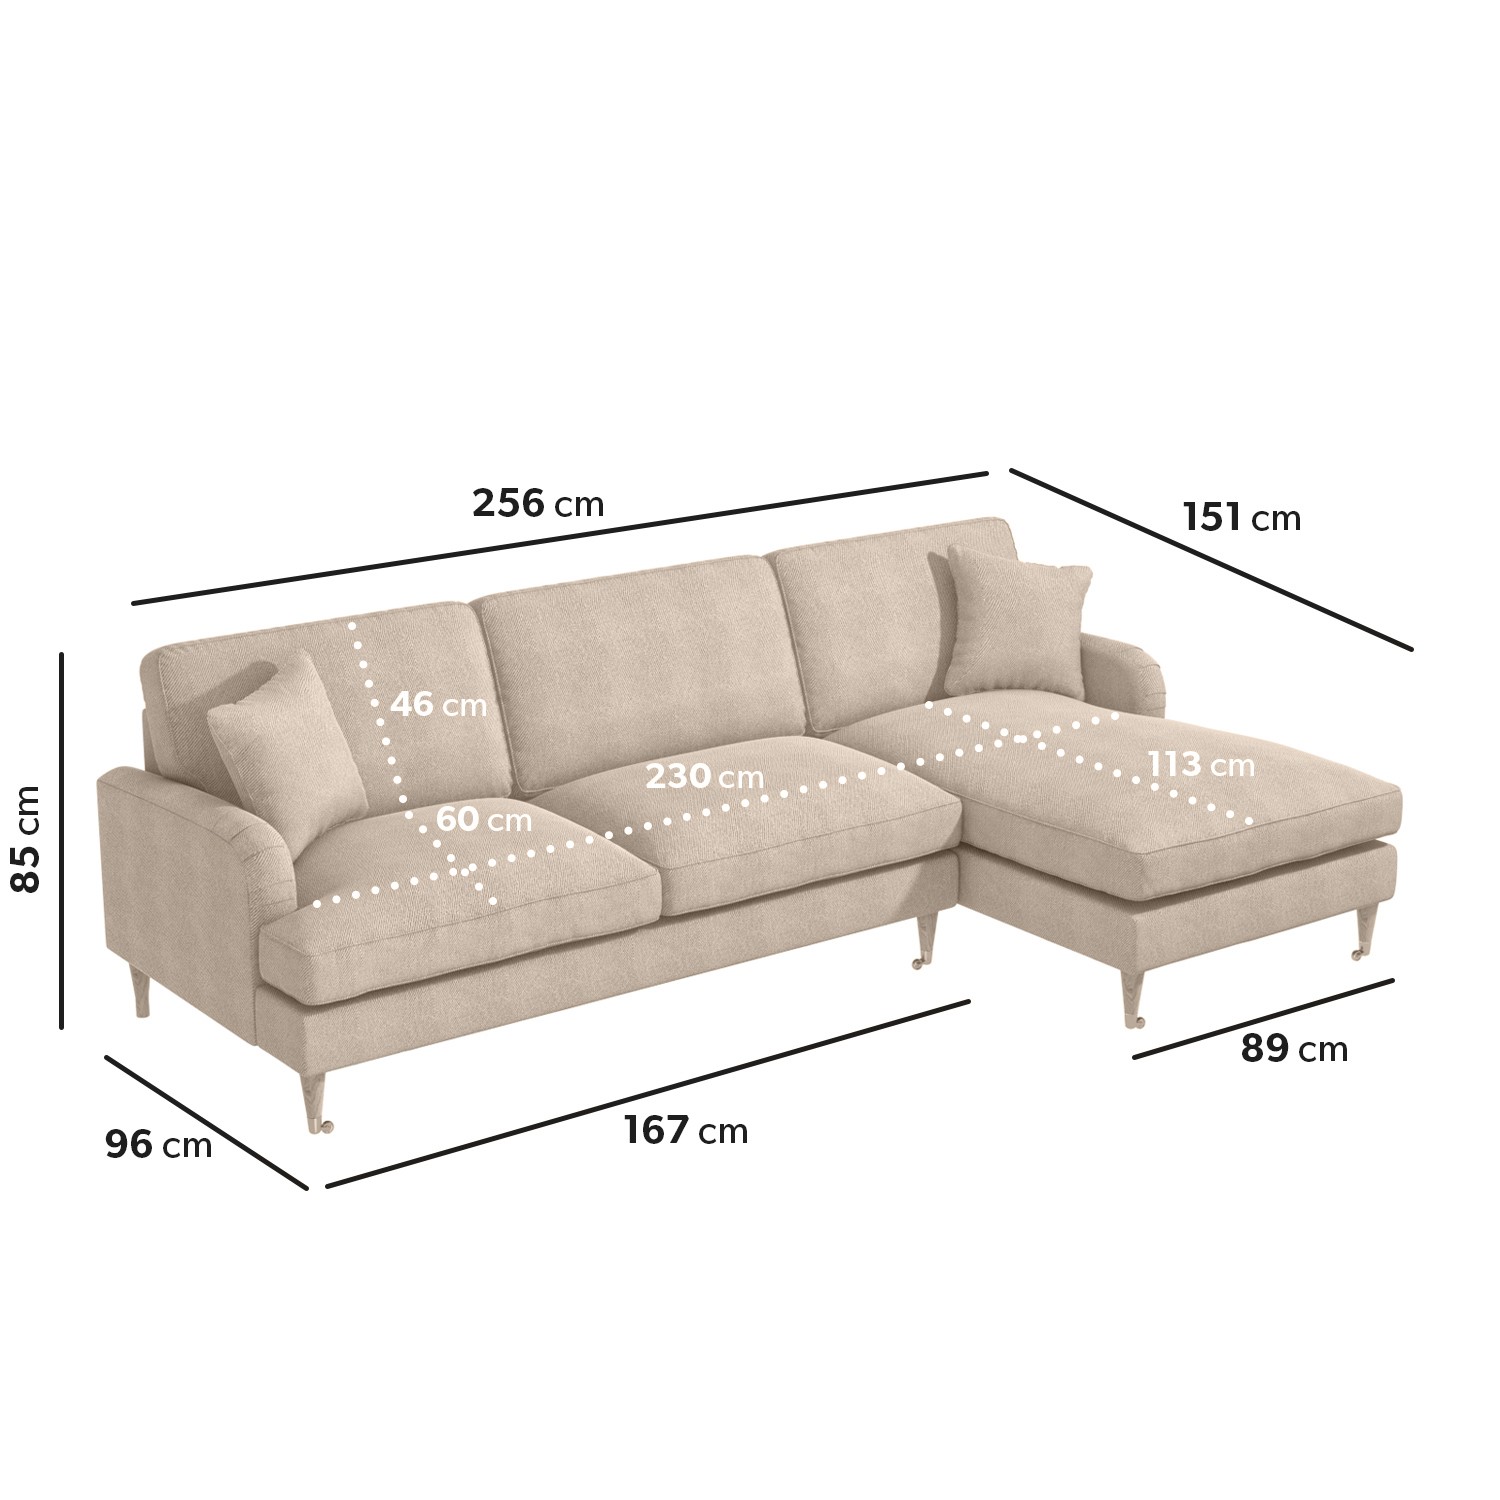 Read more about Beige fabric right hand facing l shaped sofa seats 4 payton